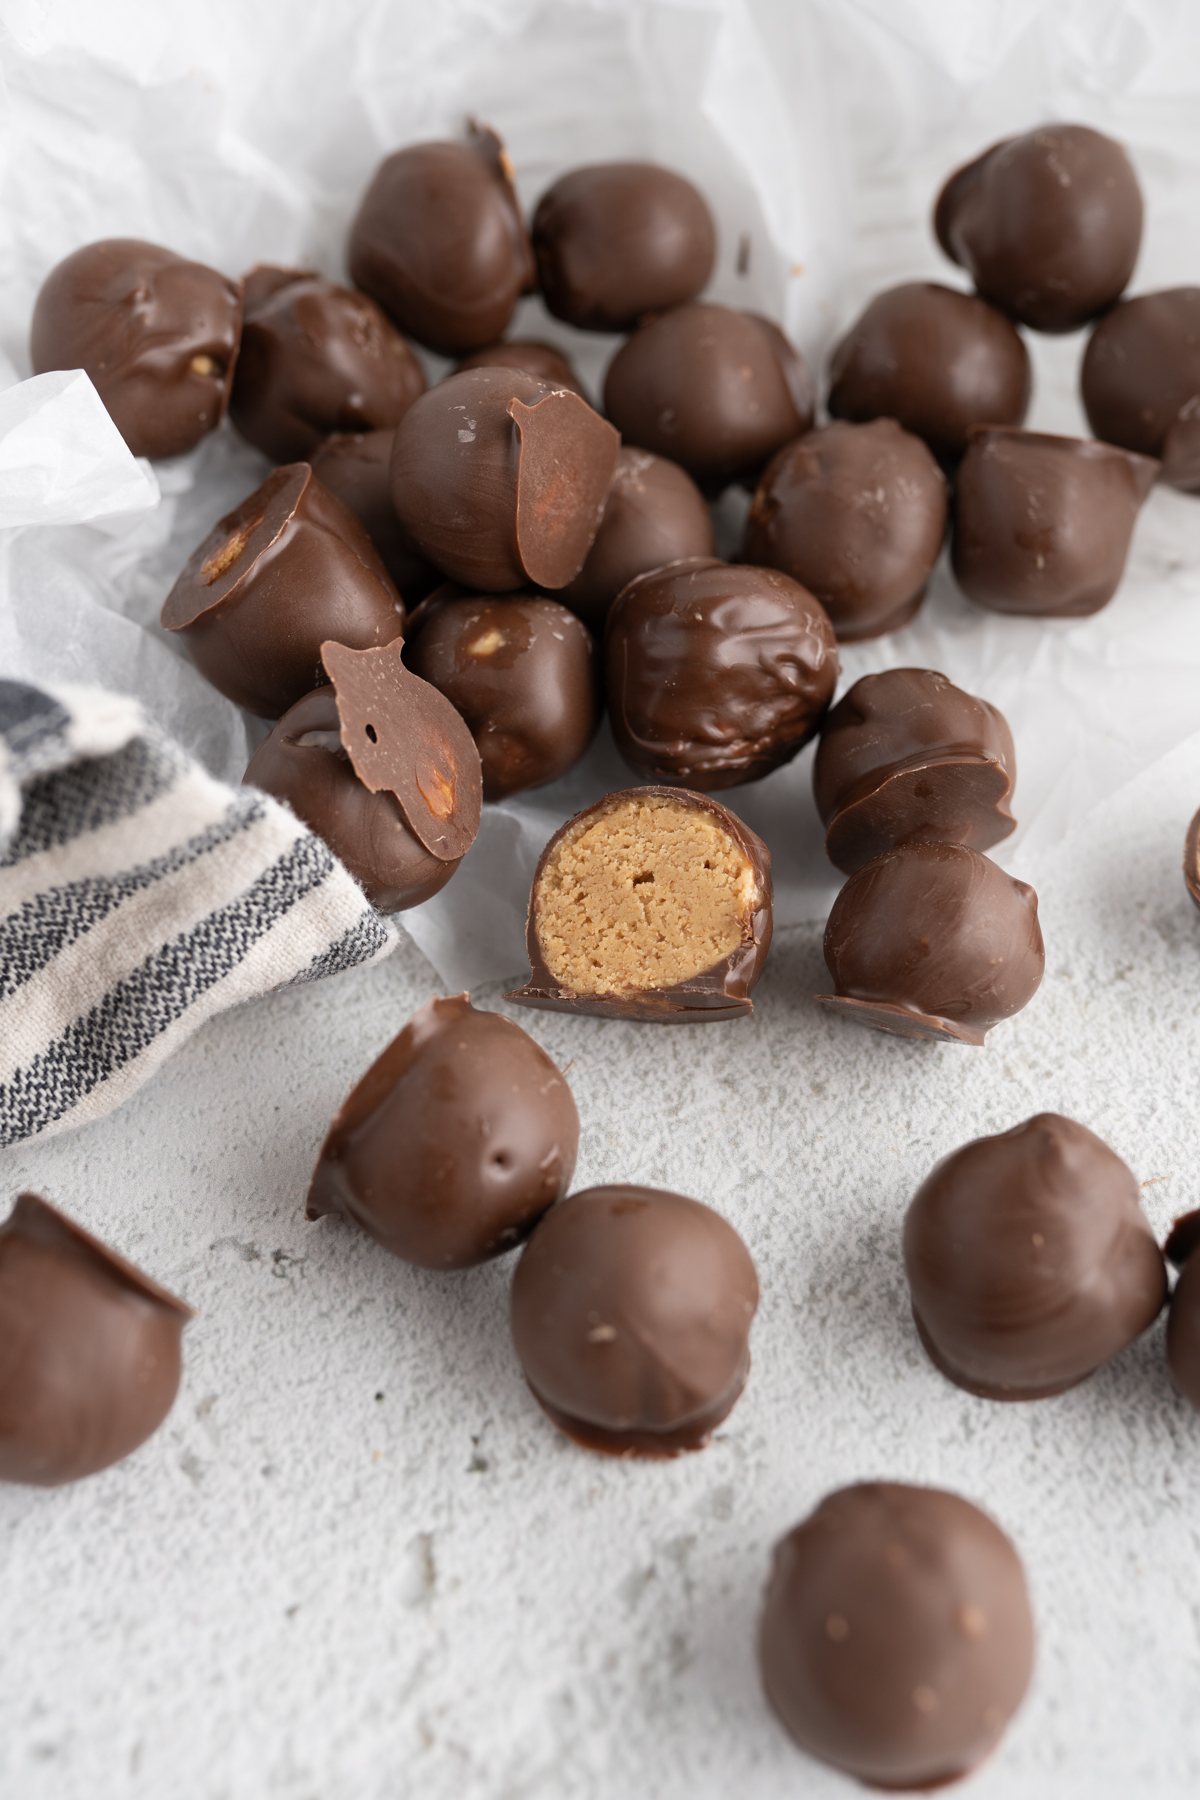 A counter filled with chocolate peanut butter balls - 1 is cut open. 